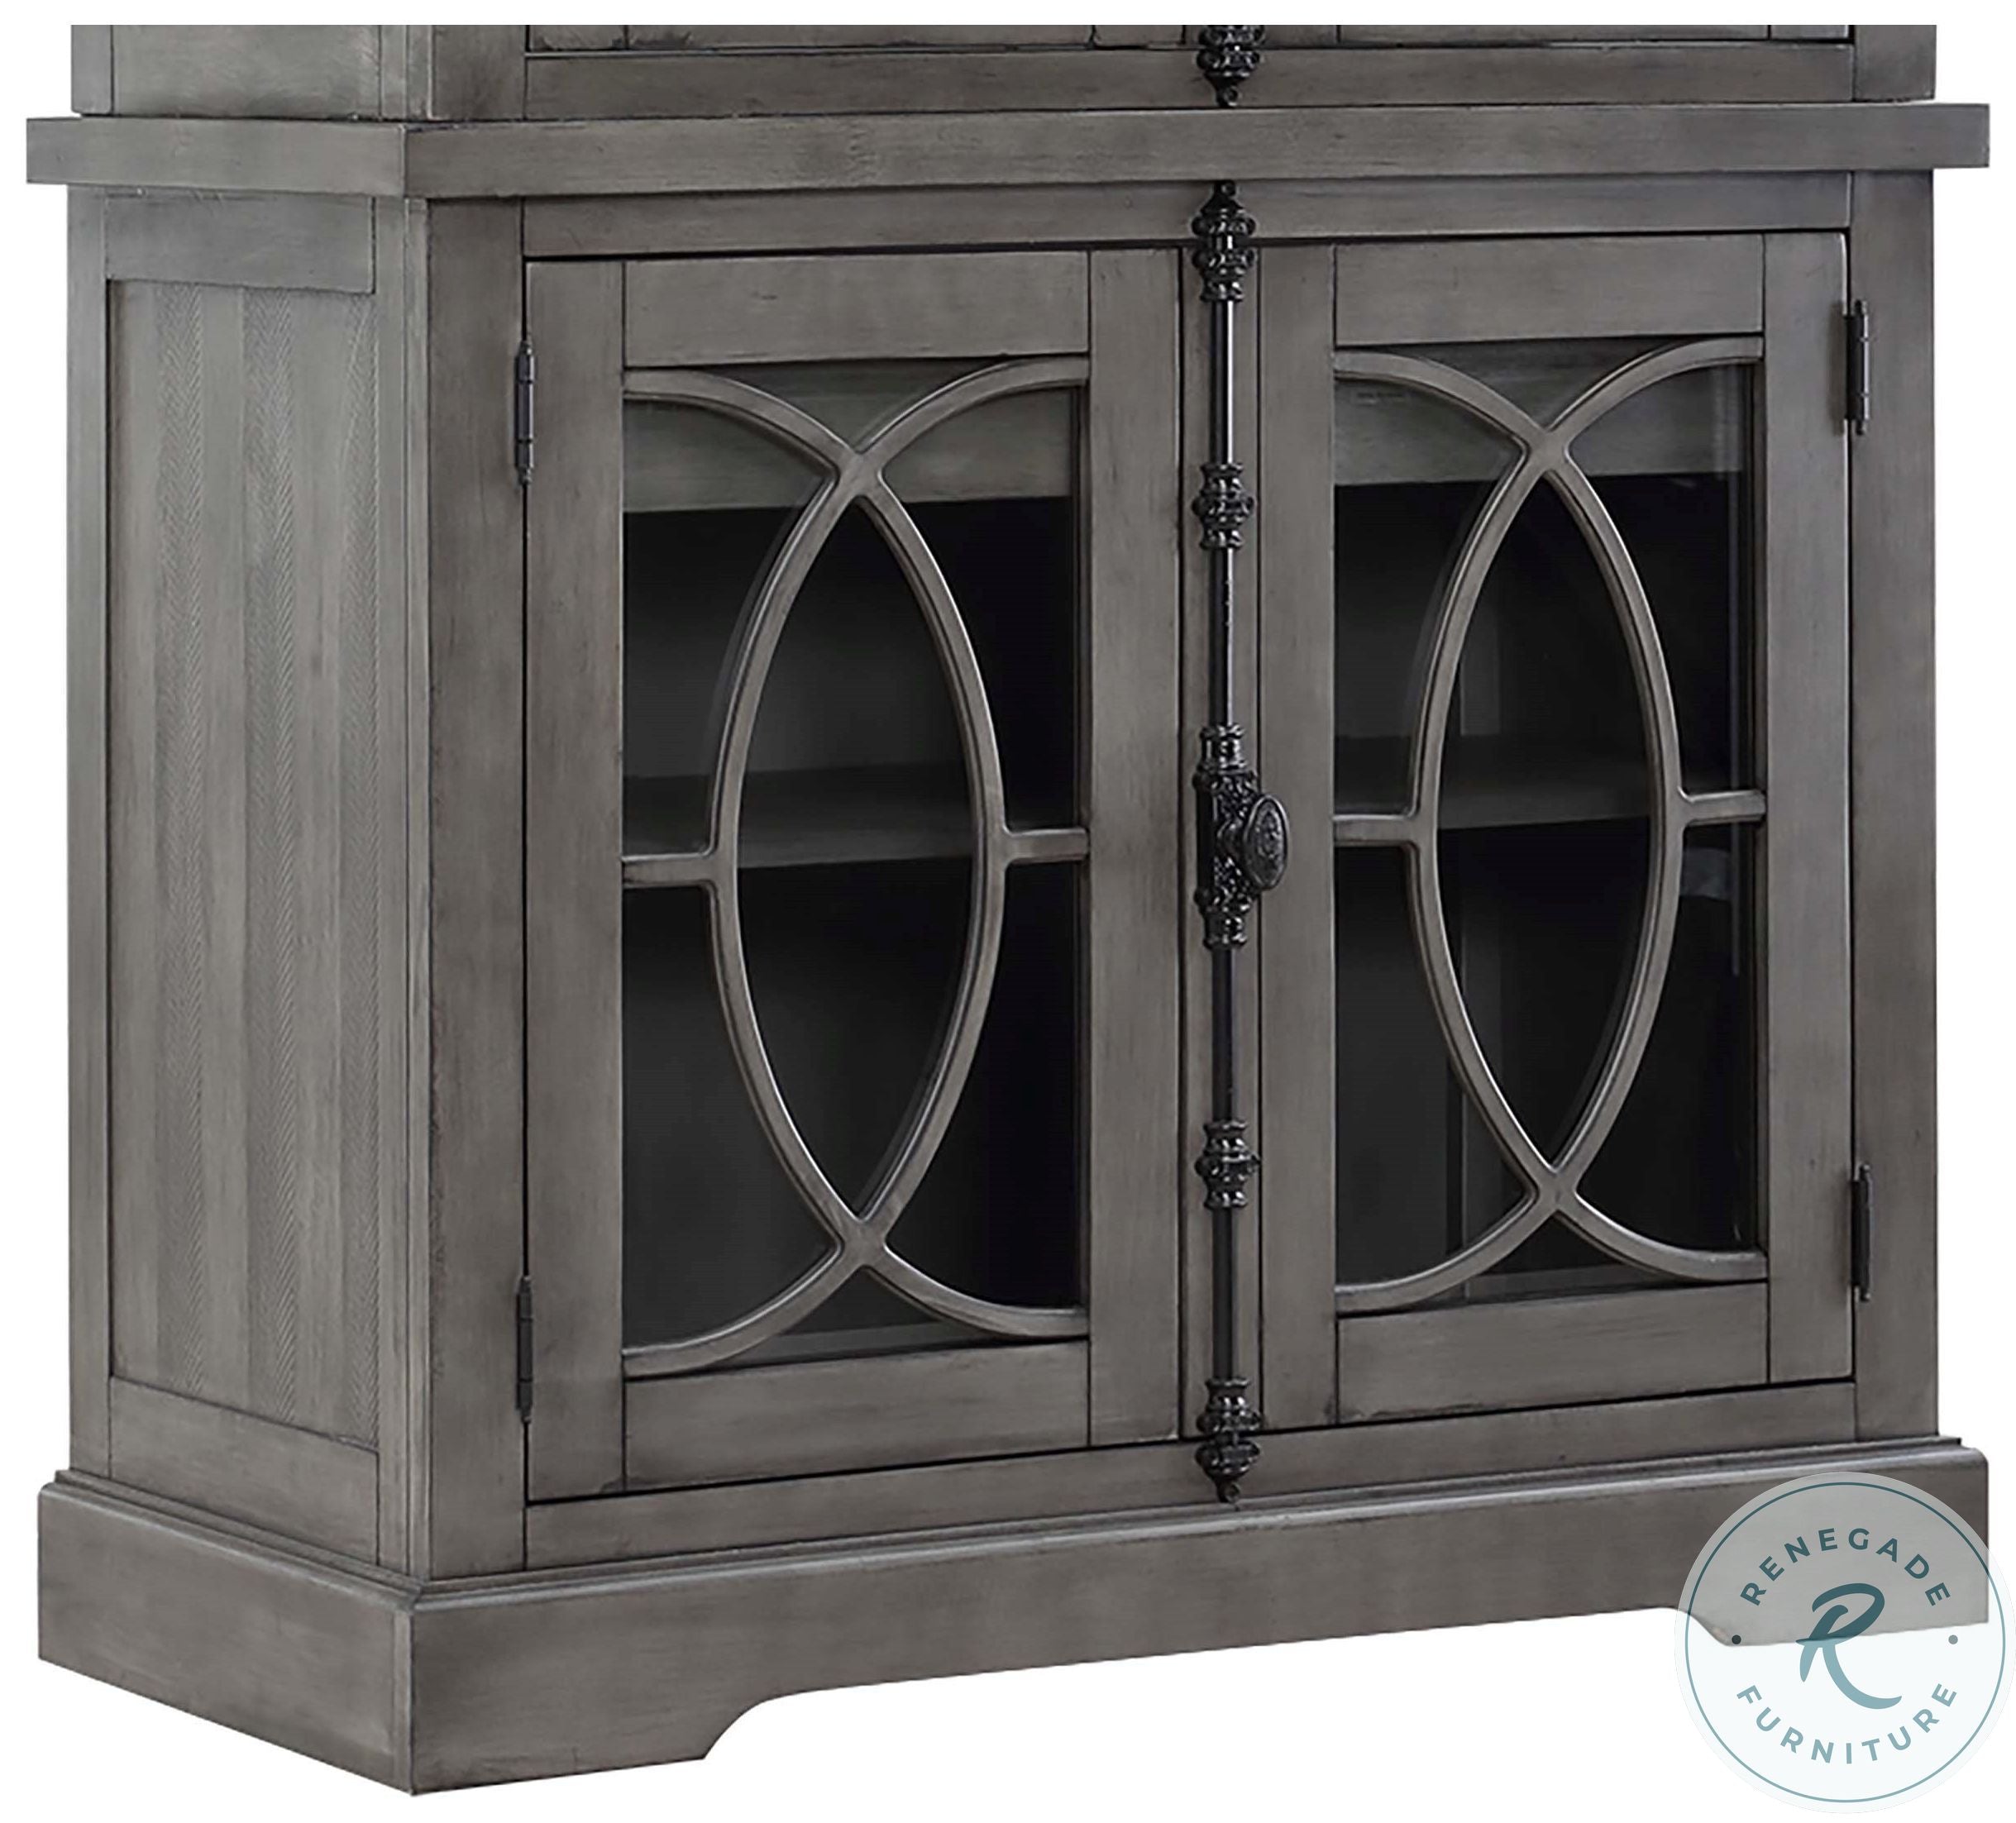 Distressed Grey Pine Solid Wood Curio Cabinet Base By: Alabama Beds